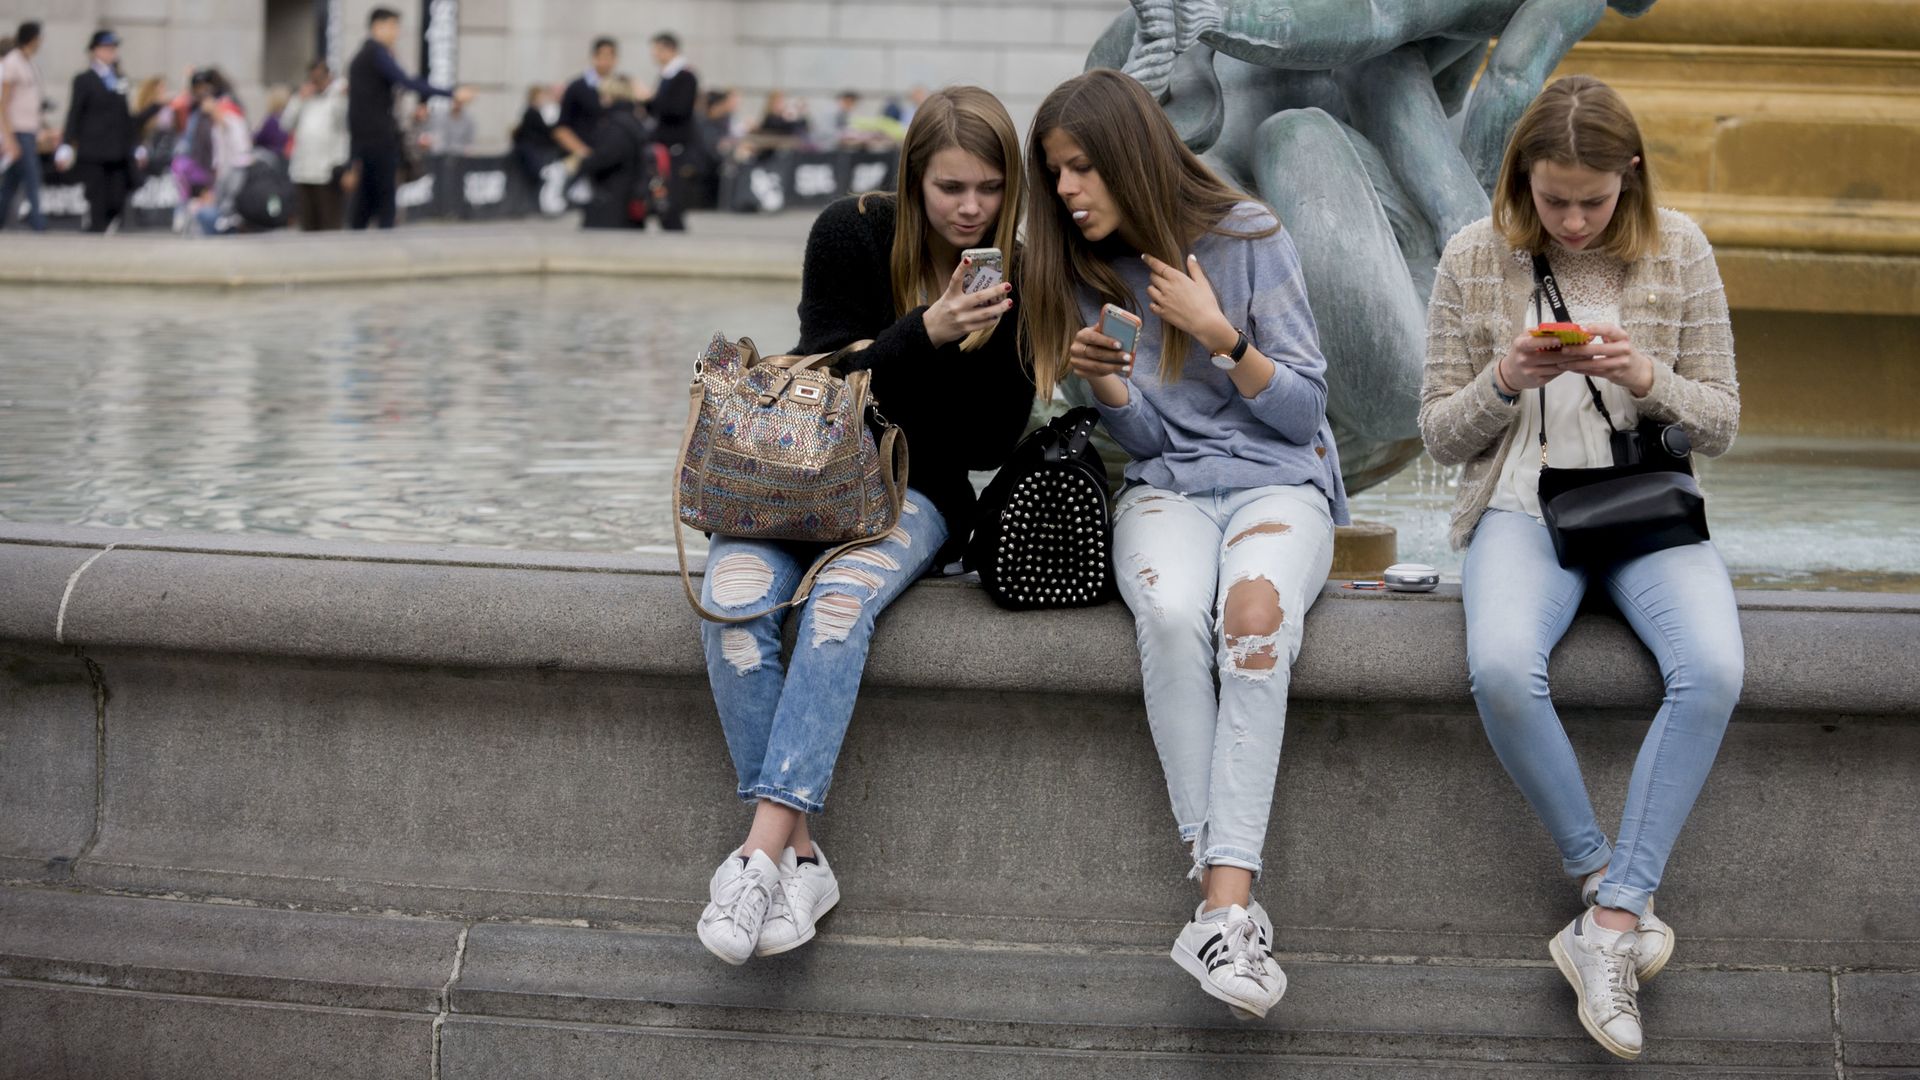 Three teenage girls lost in the world of smartphone apps and messaging.